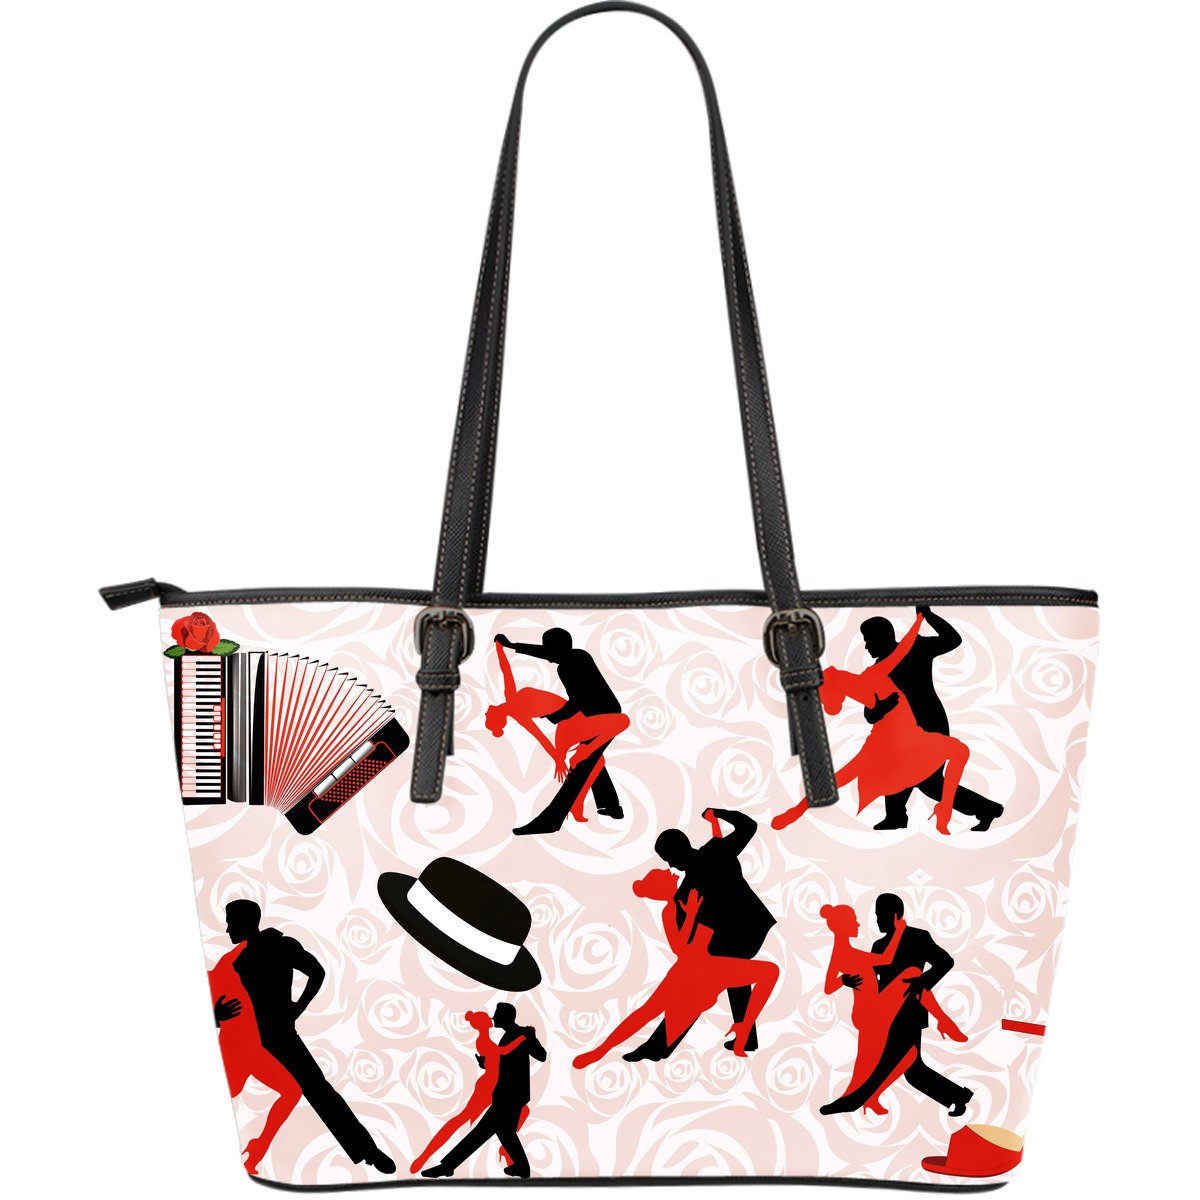 argentina-tango-dance-large-leather-tote-bag